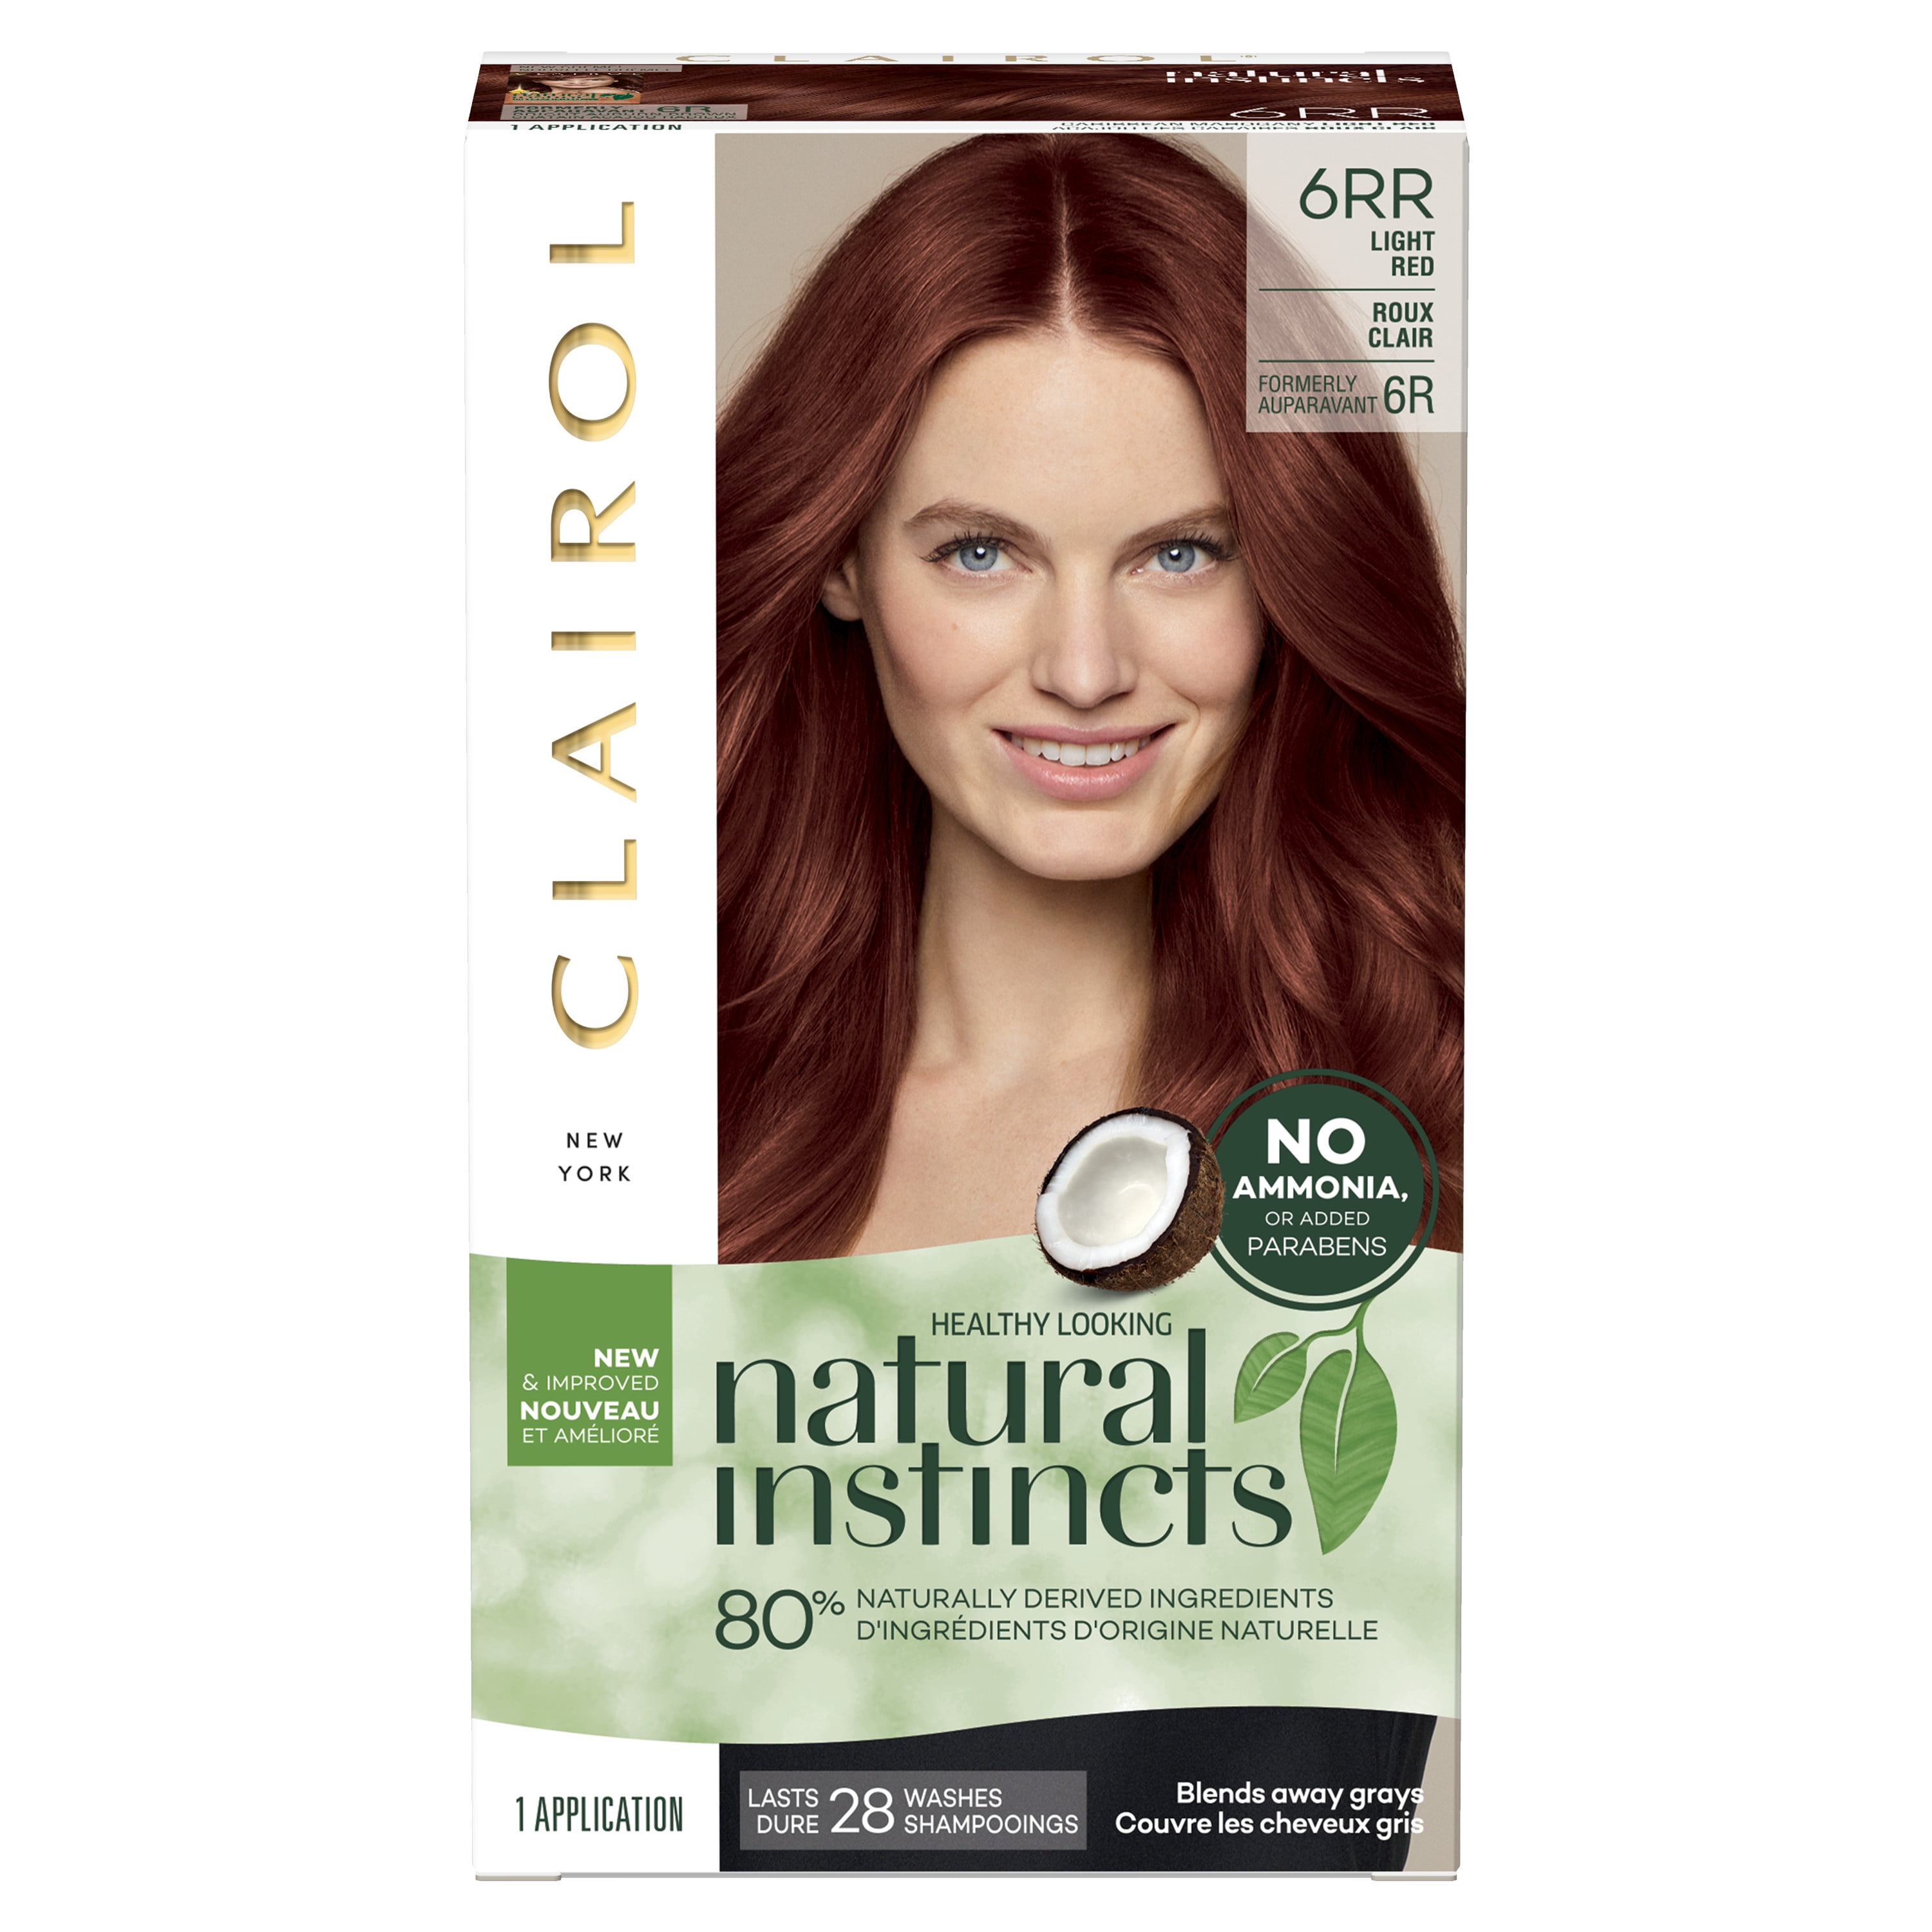 Clairol Natural Instincts Demi-Permanent Hair Color Creme, 6RR Light Red, Hair  Dye, 1 Application 